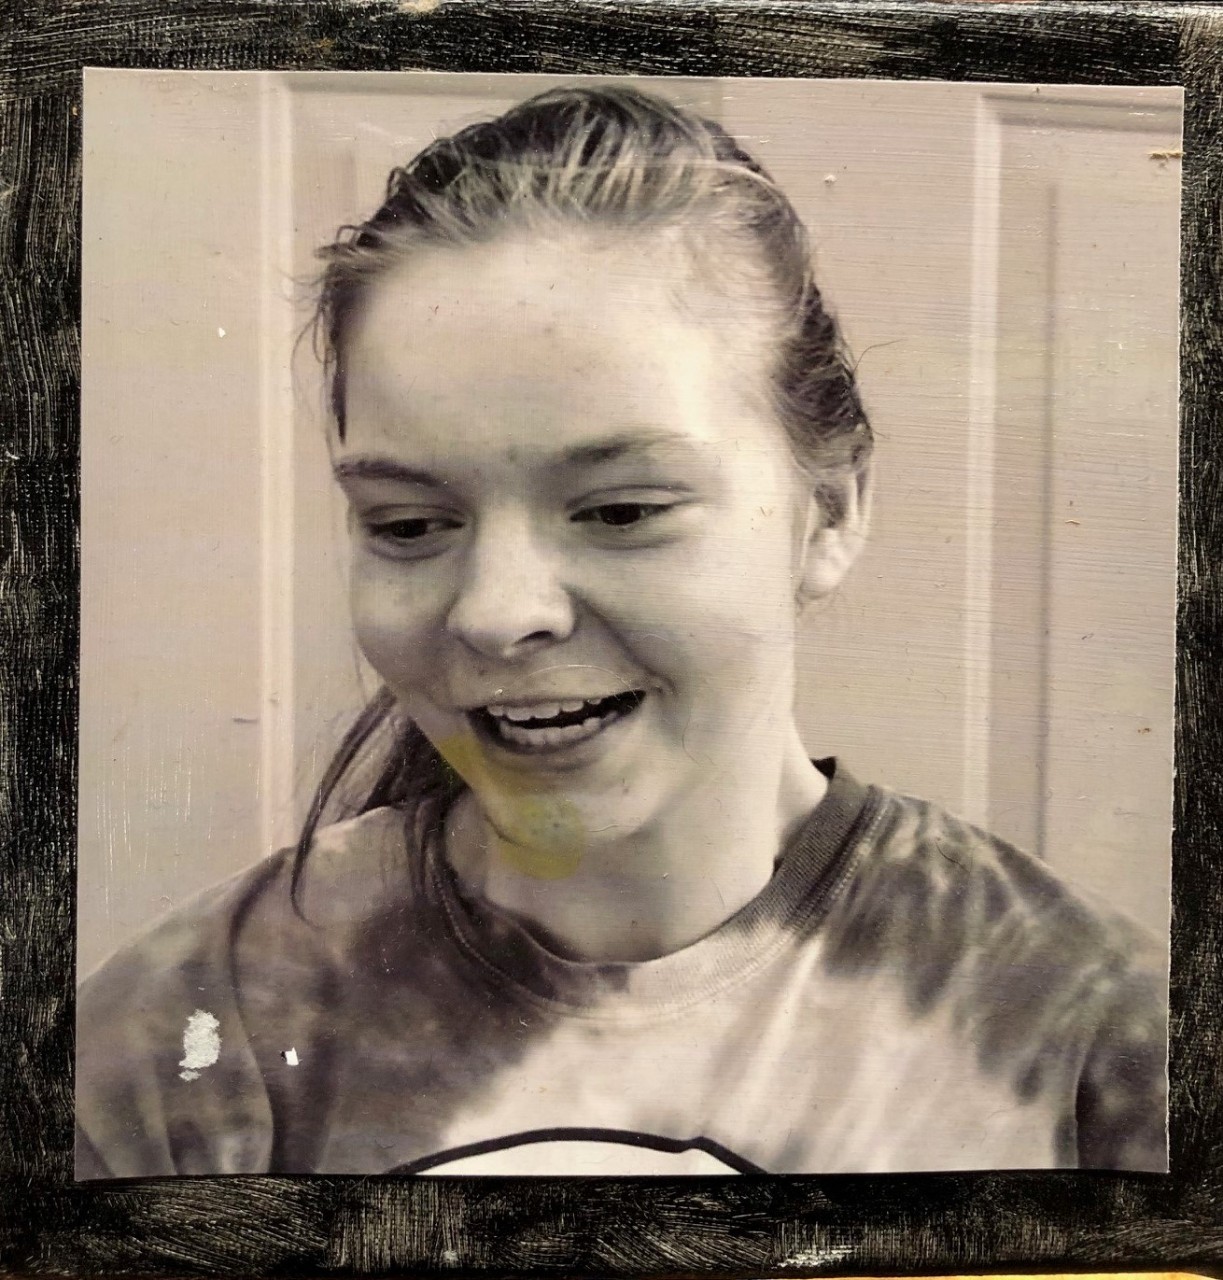 a sepia toned square headshot of Teresa, a young white woman with light hair pulled back in a ponytail, wearing a tie-dyed shirt